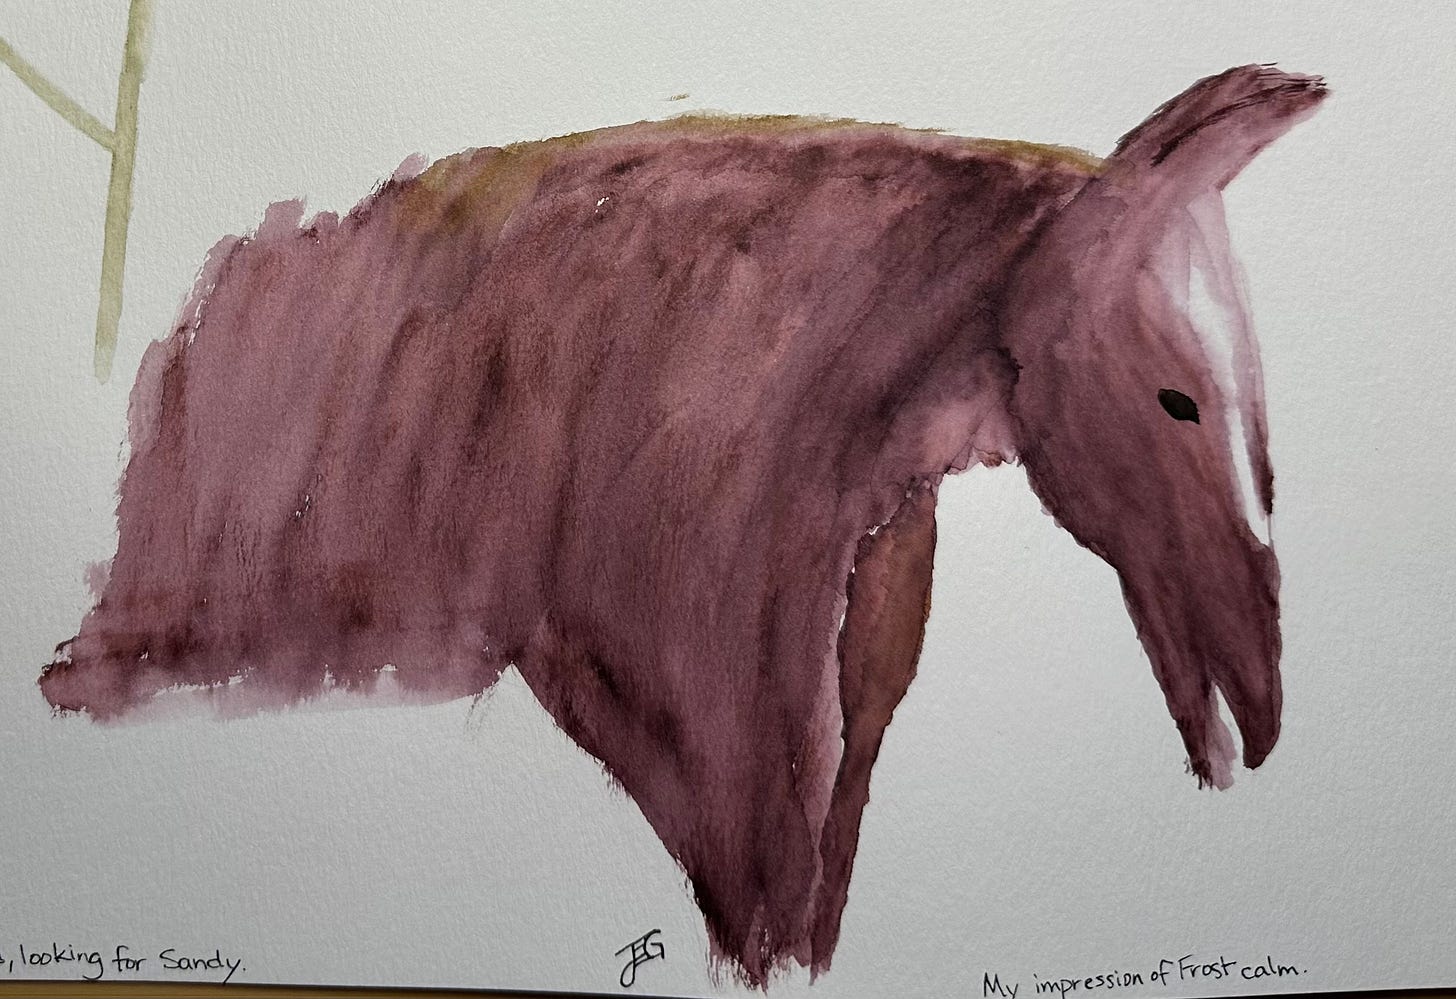 Watercolor of the front half of a brown horse with her head slightly down.